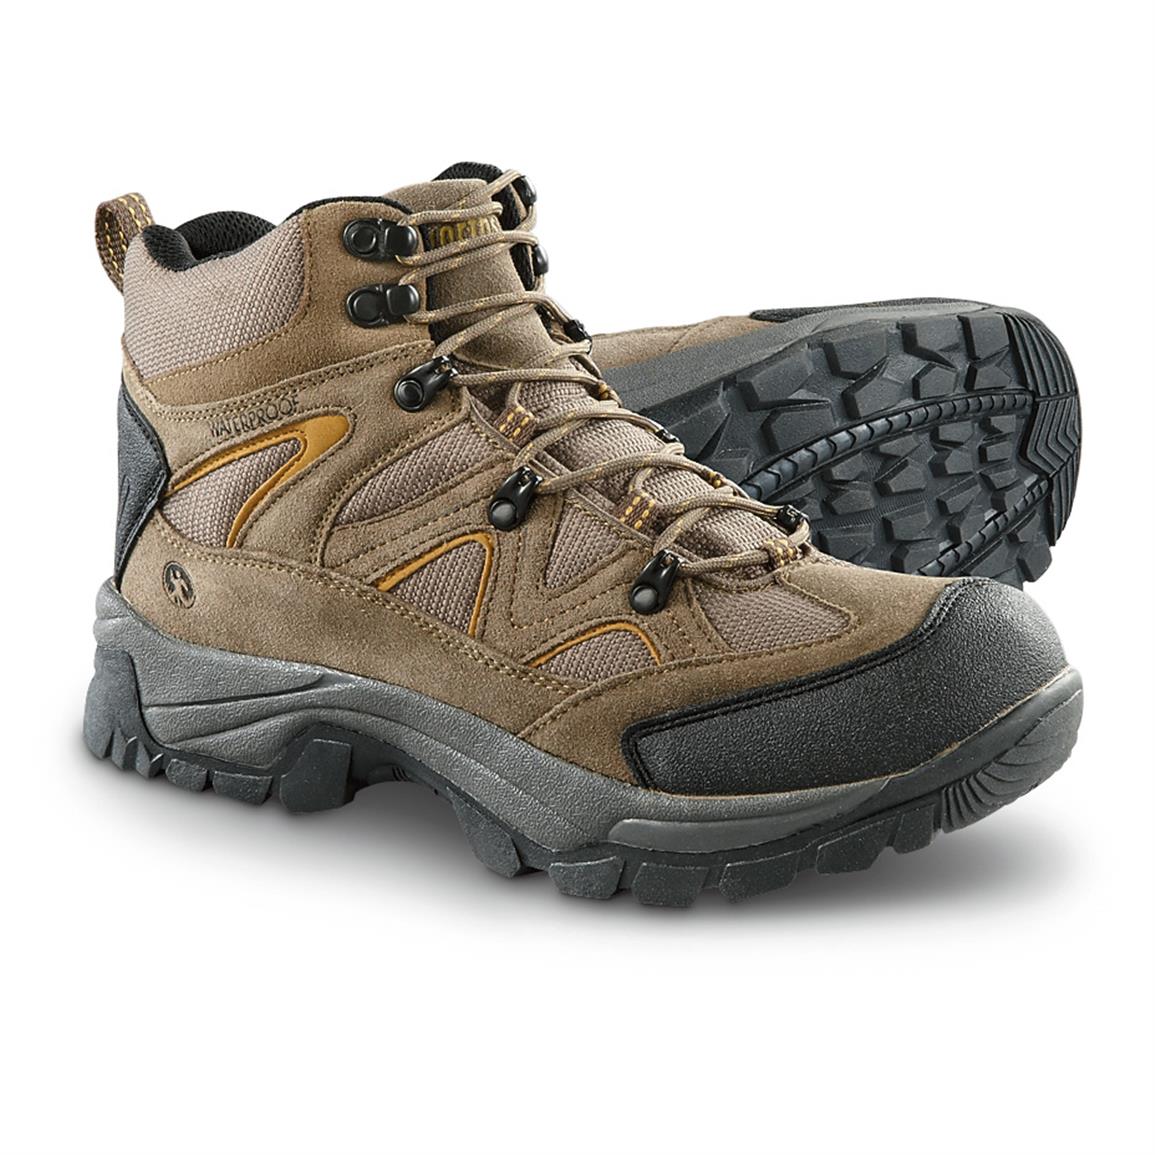 Best Waterproof Boots For Backpacking | IUCN Water